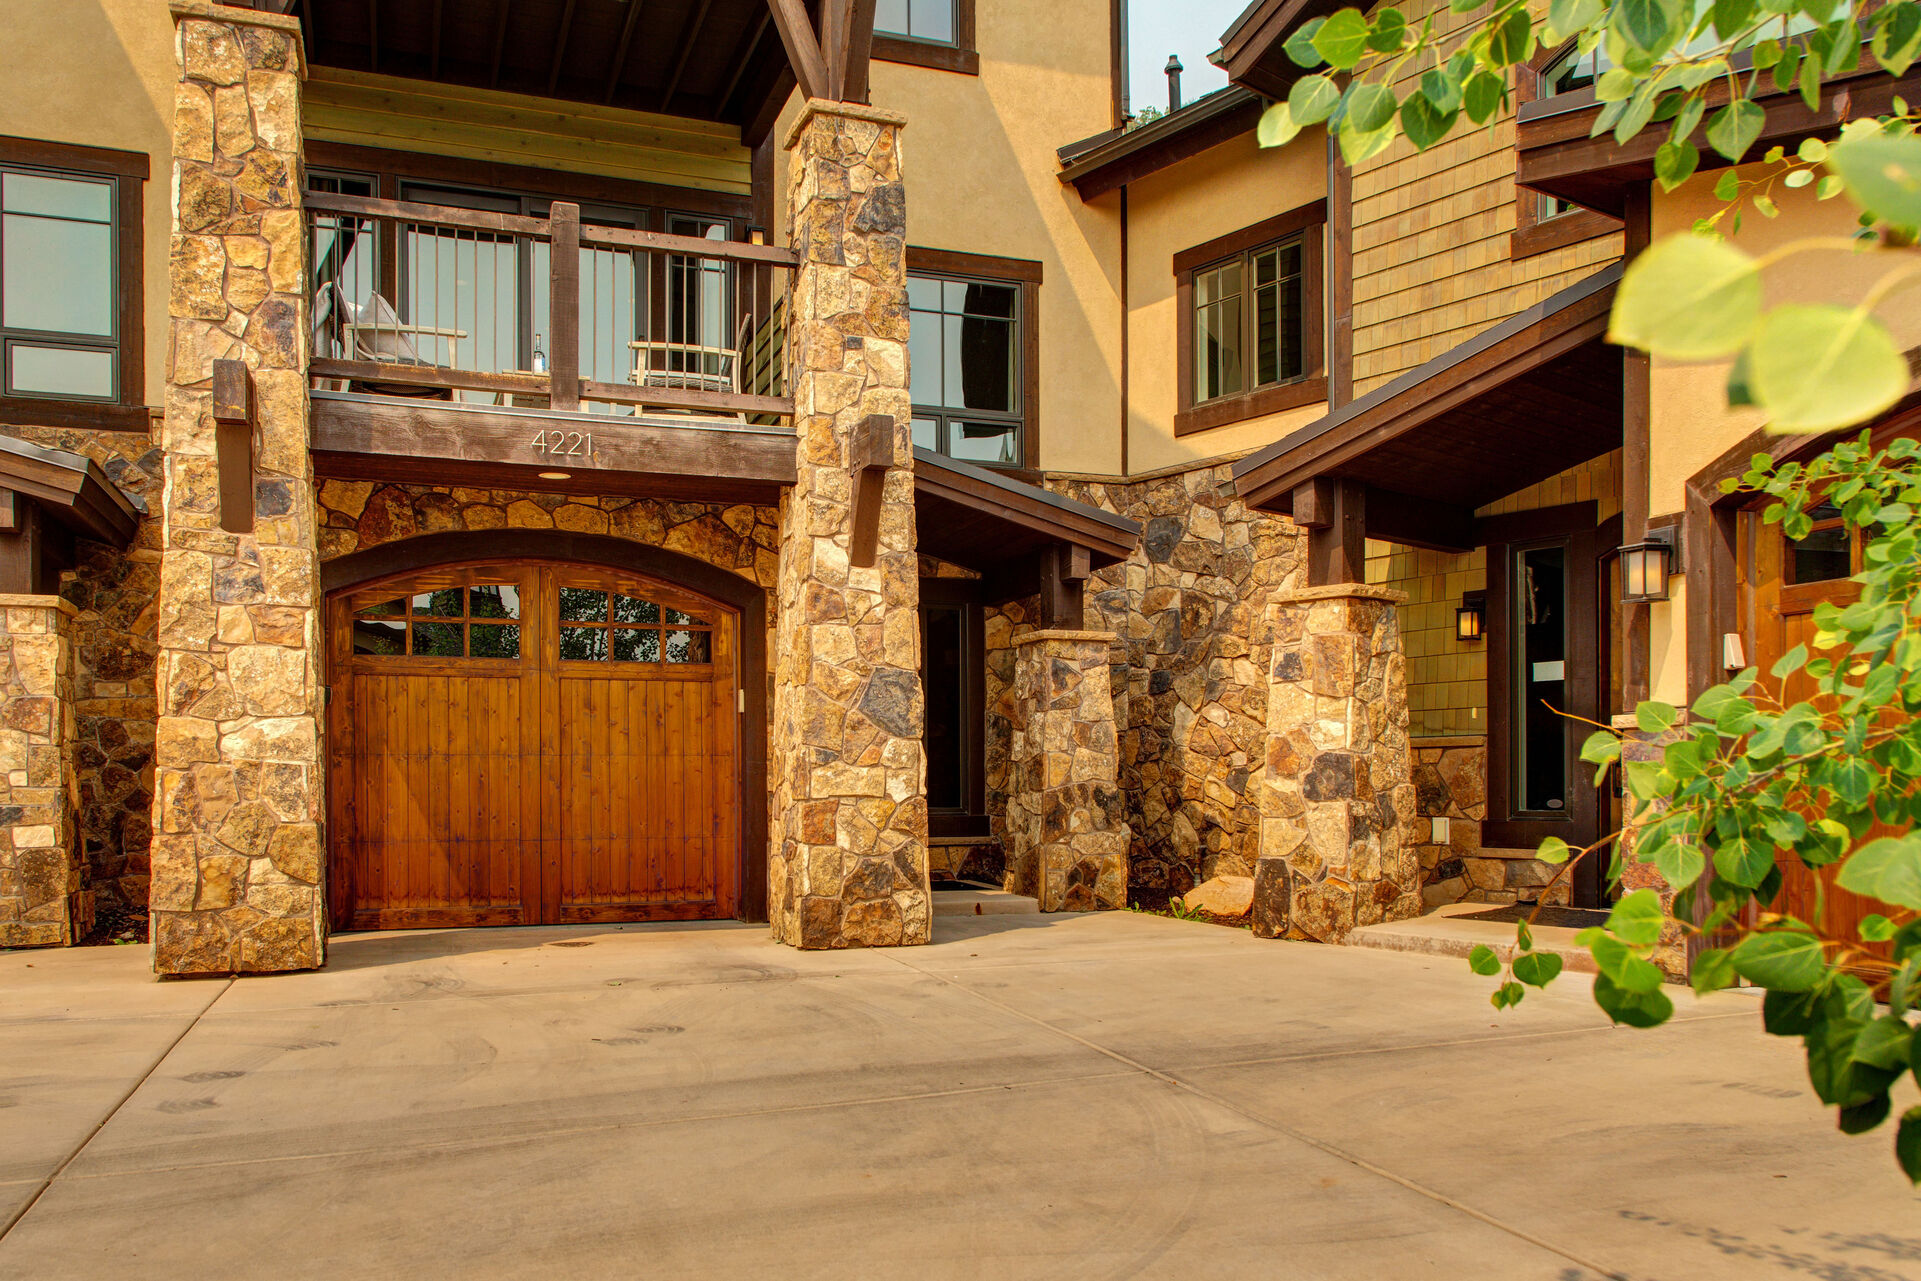 Private one-car garage and front door entrance